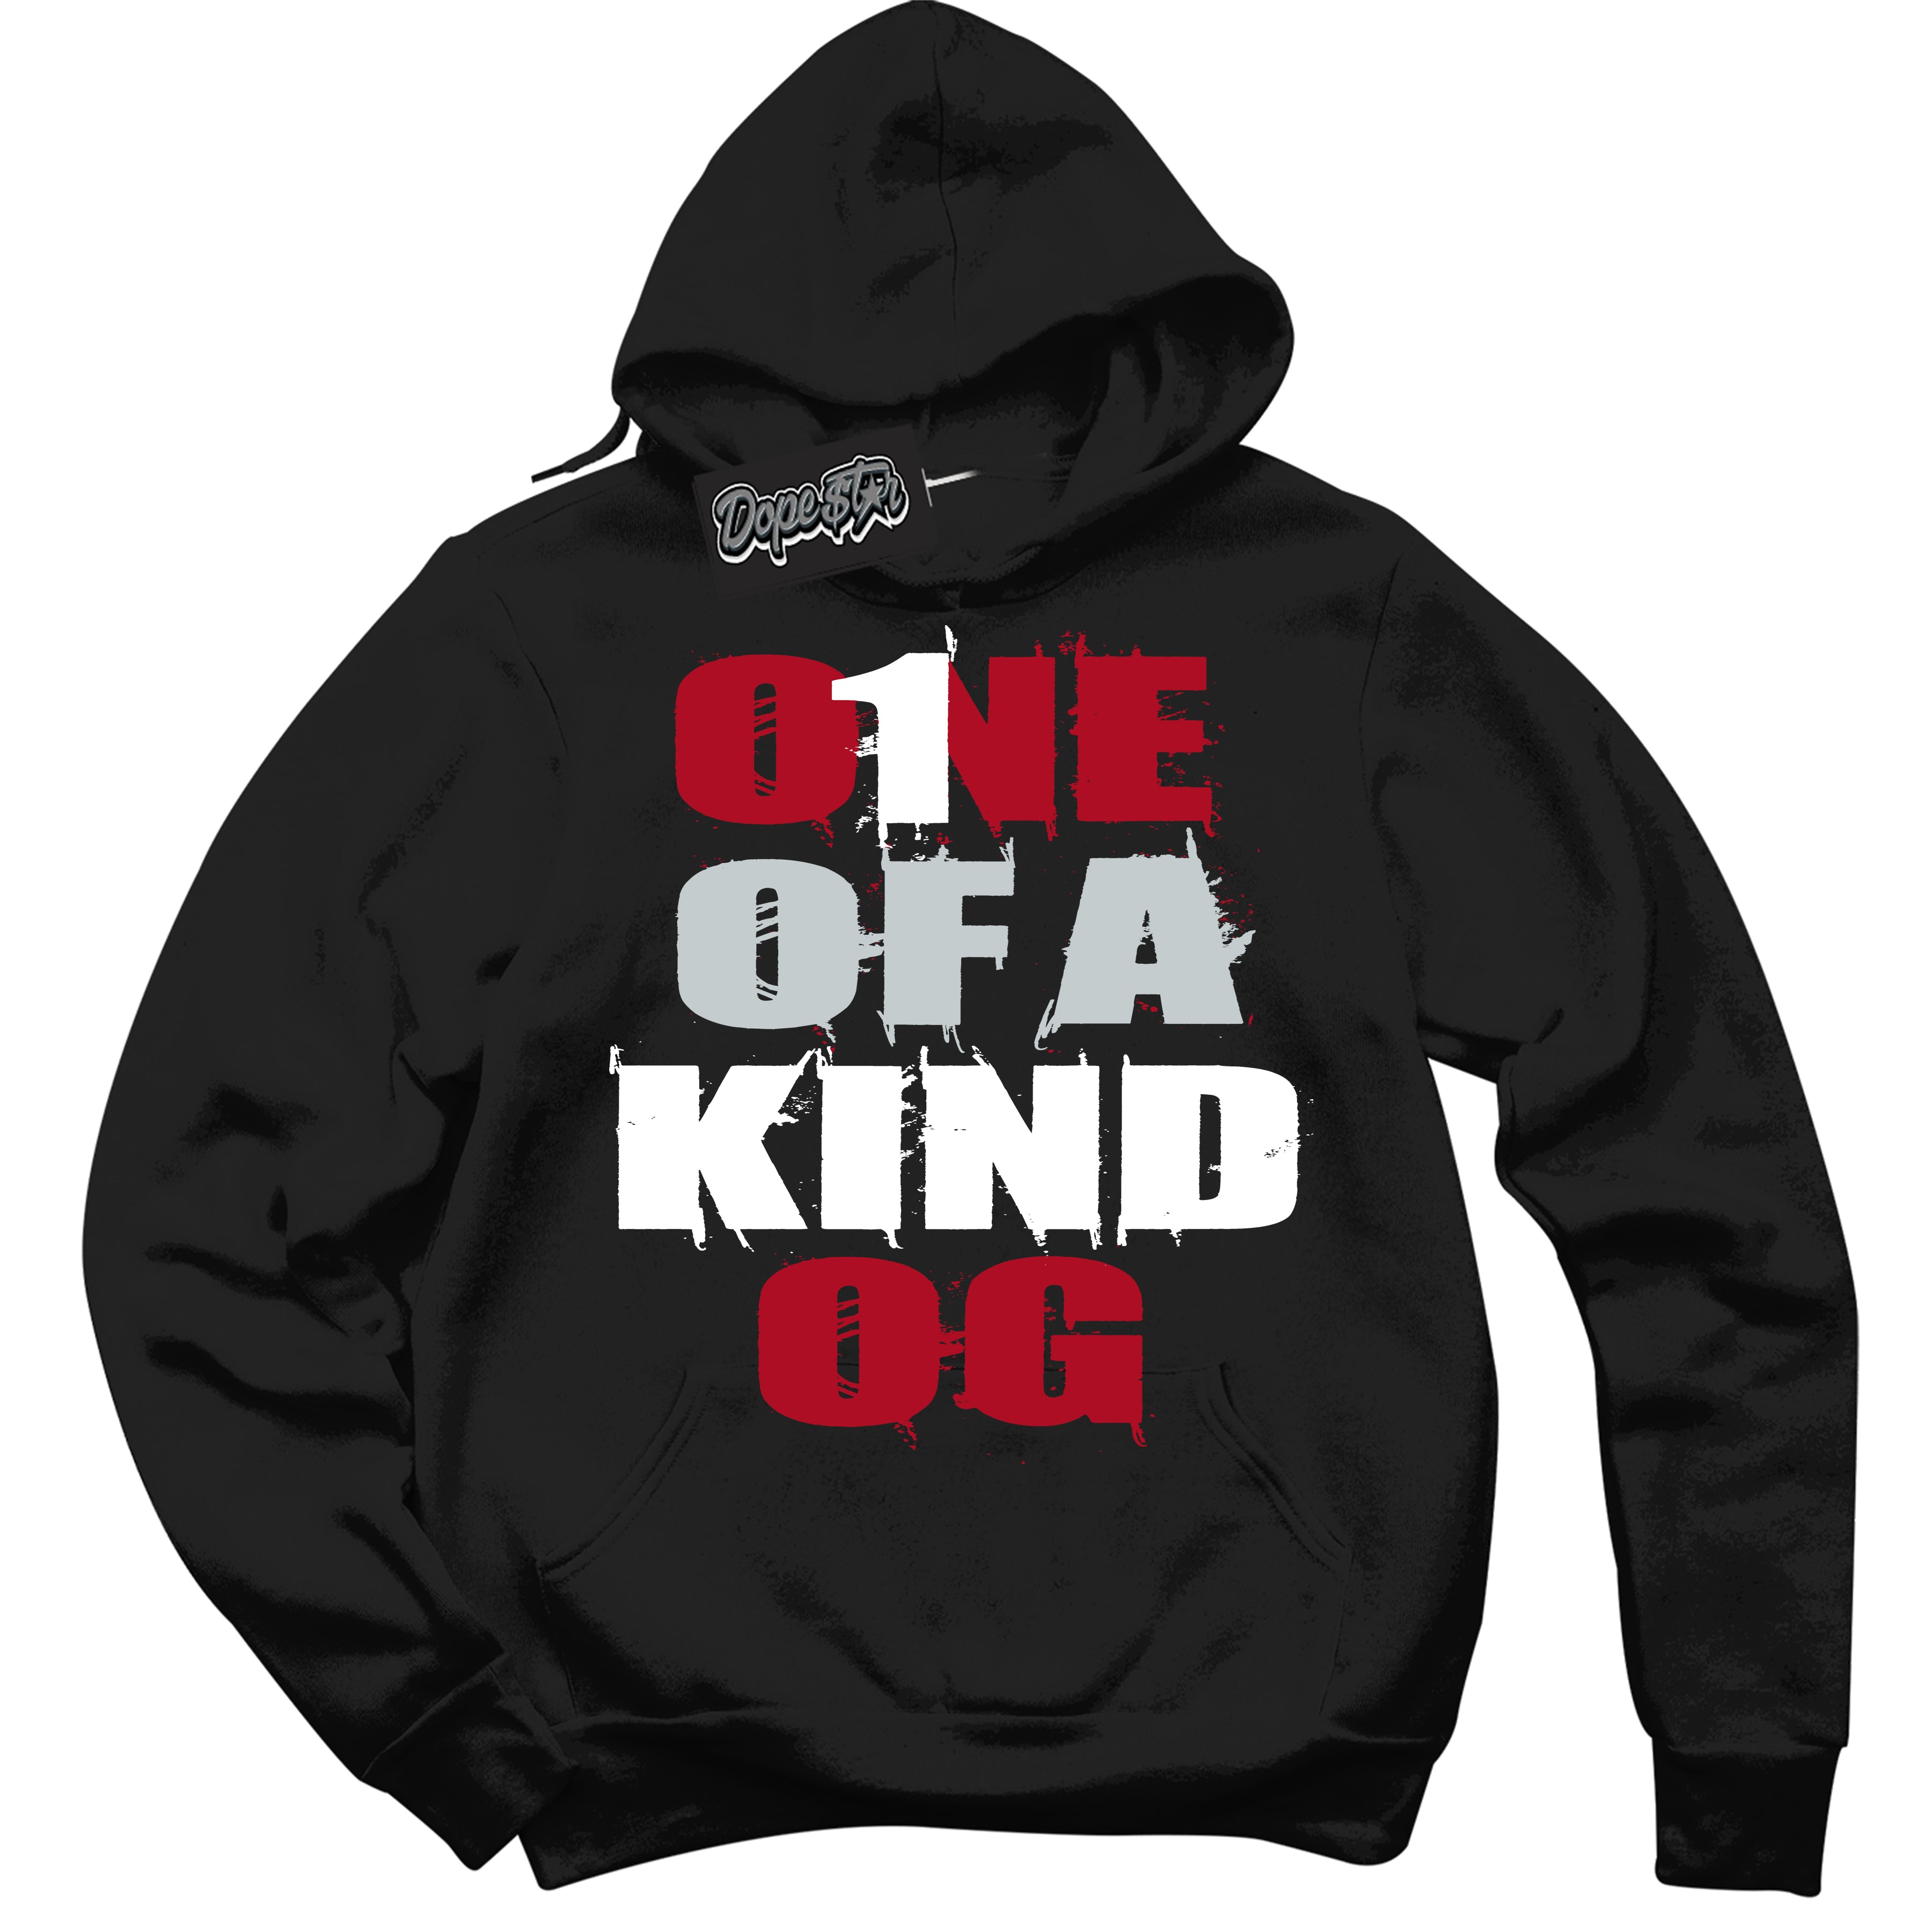 Cool Black Hoodie with “ One Of A Kind ”  design that Perfectly Matches  Reverse Ultraman Sneakers.